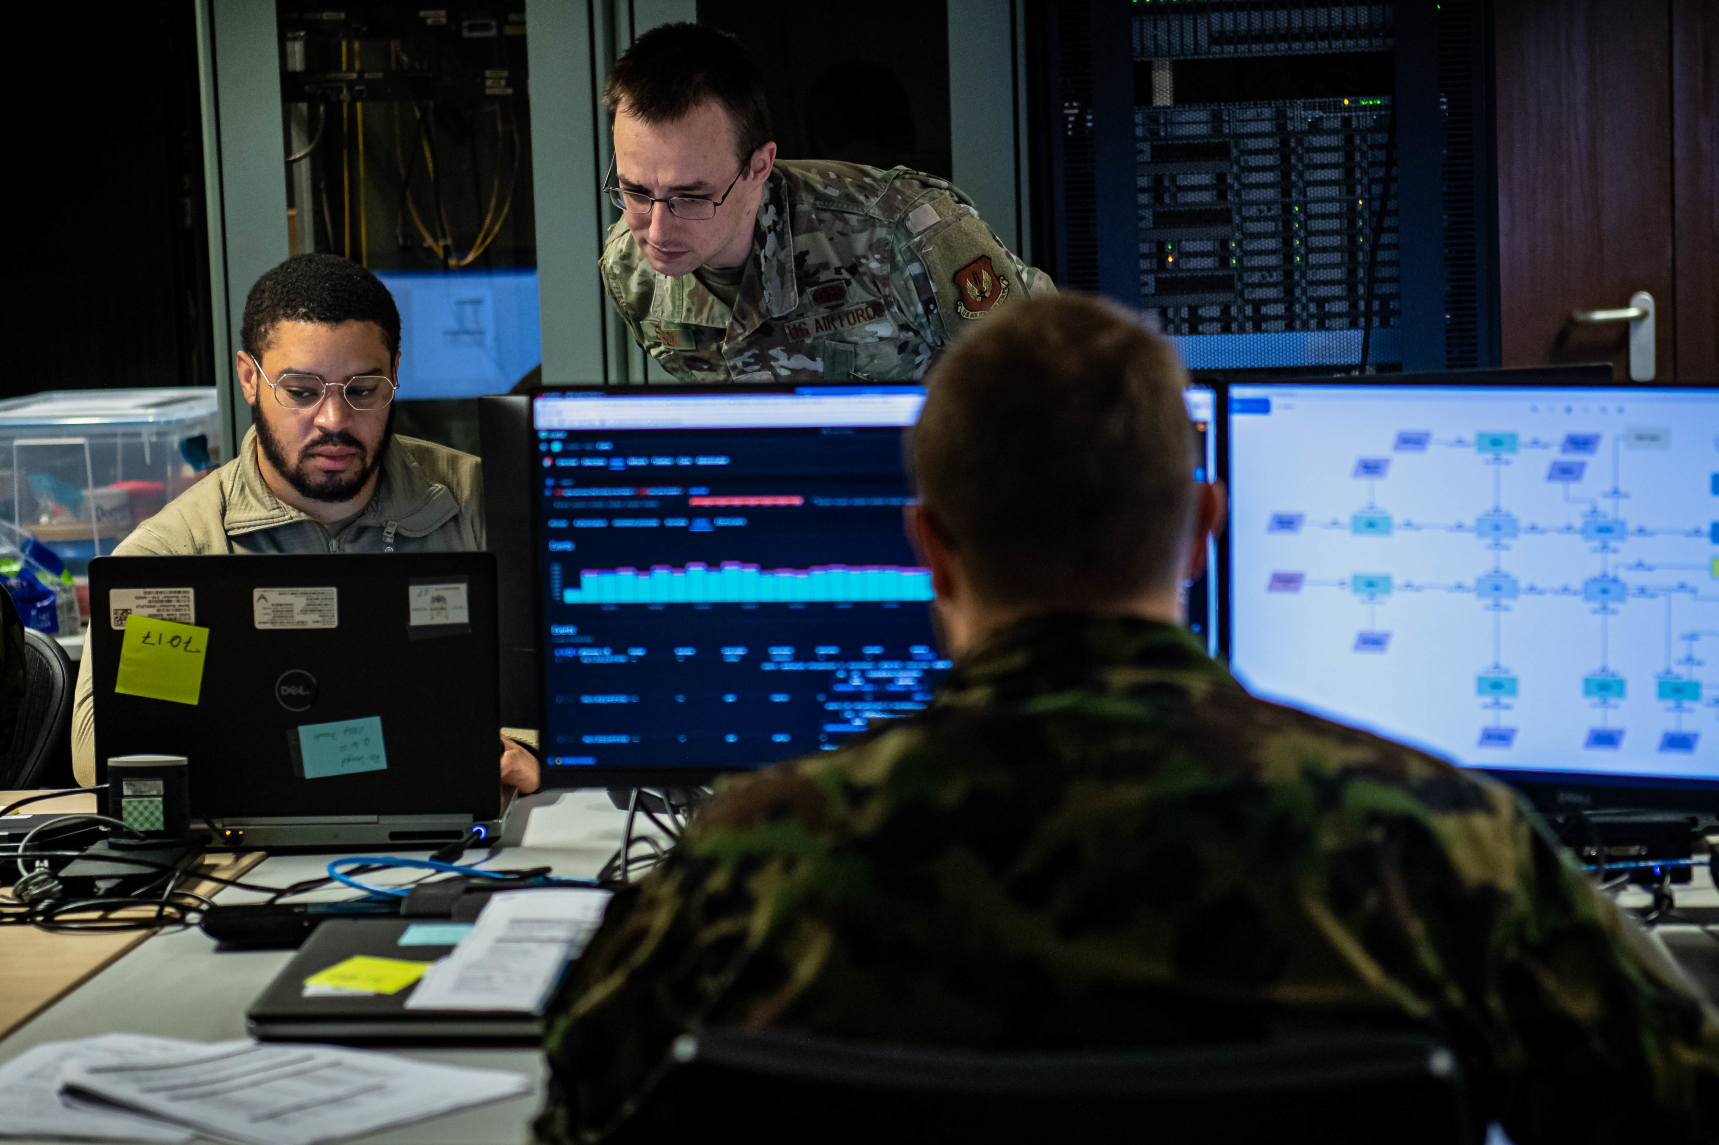 Soldiers analyze metadata to identify any suspicious activity on the networ